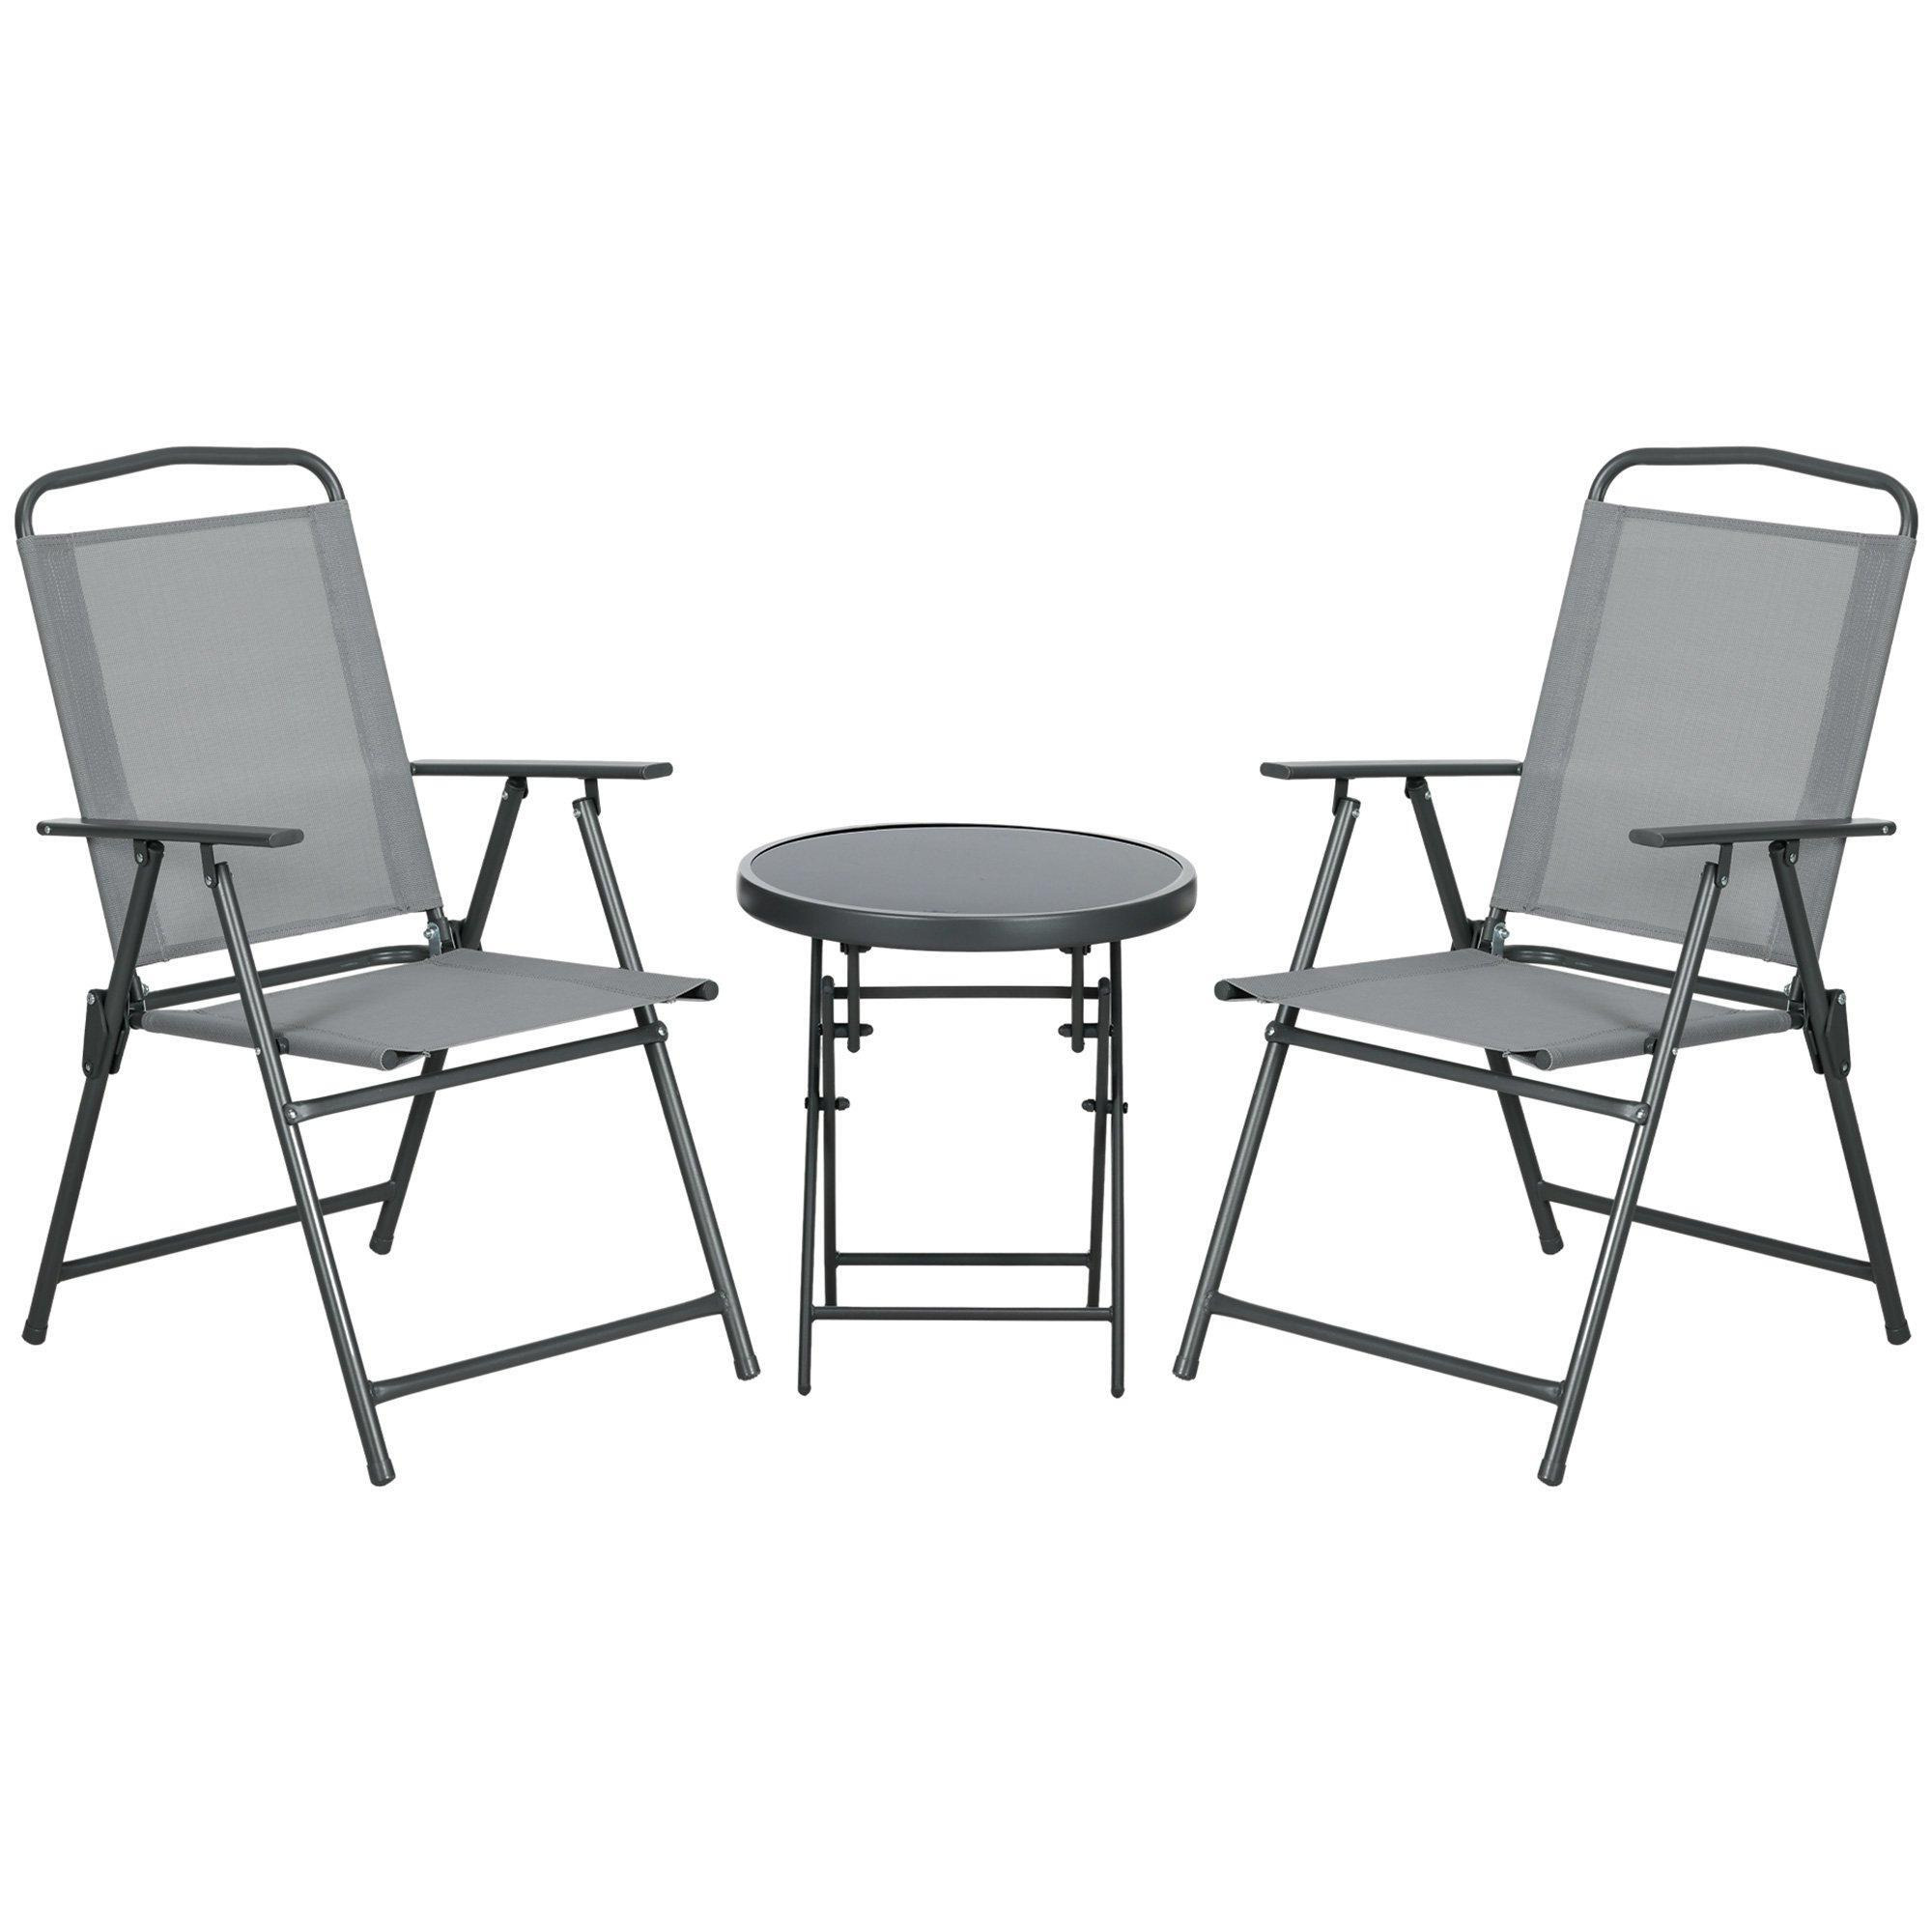 Patio Bistro Set Folding Chairs & Coffee Table for Balcony - image 1